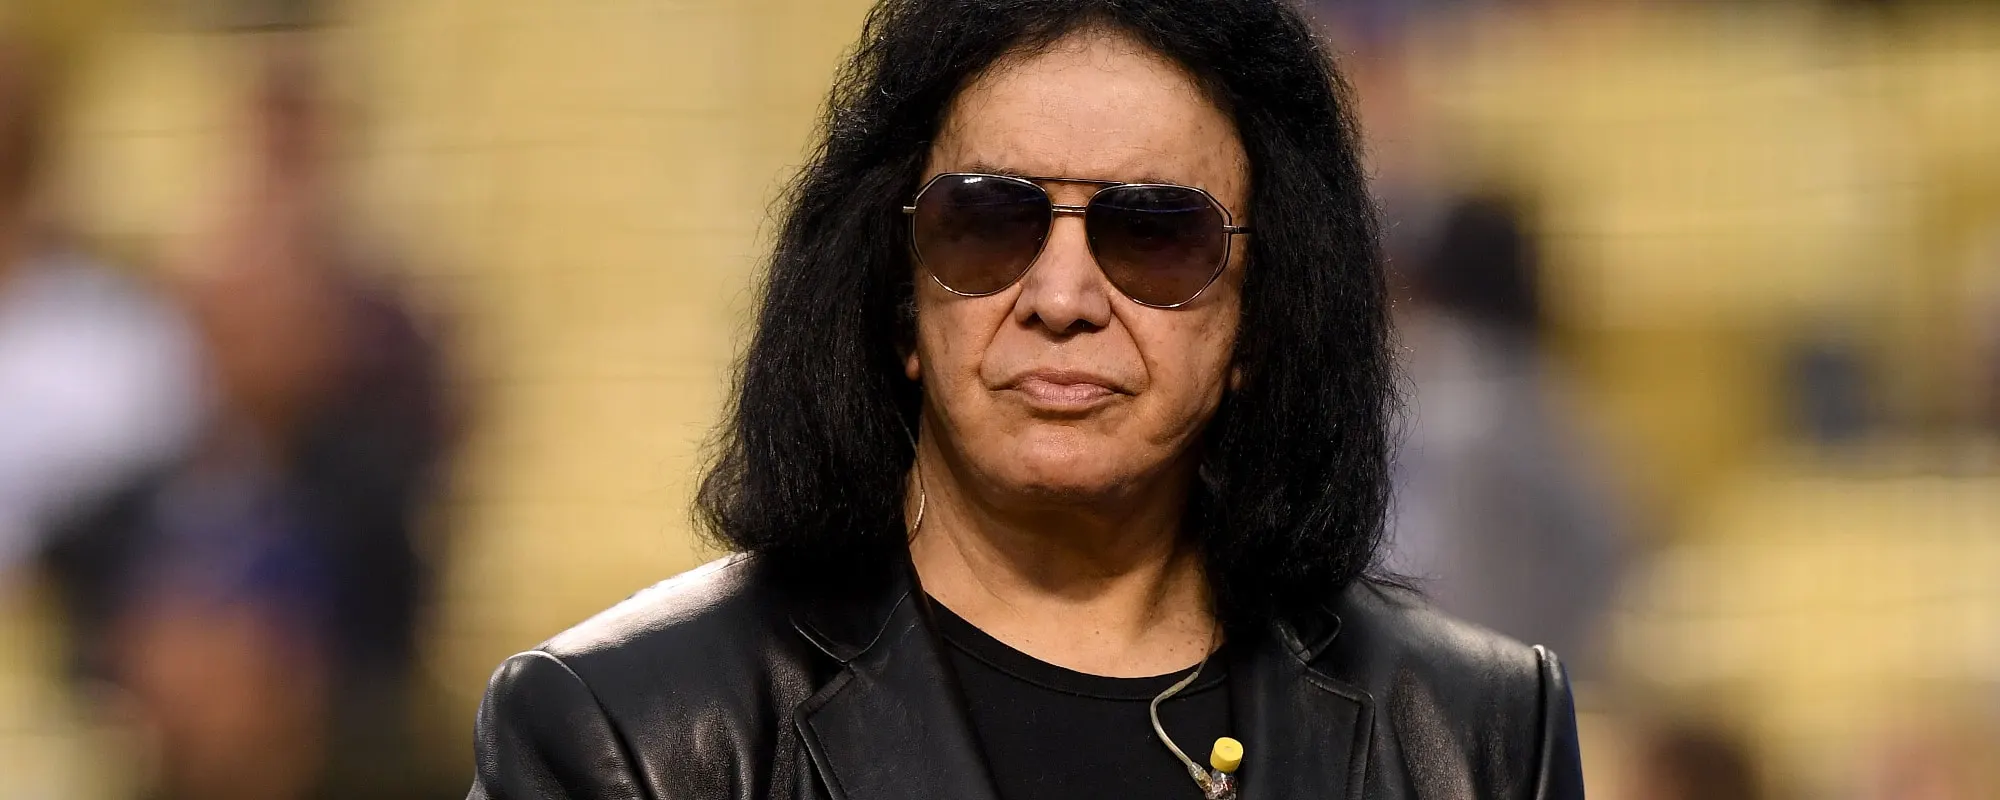 After Contracting COVID, Gene Simmons Speaks Out: “I Don’t Care About Your Political Beliefs”